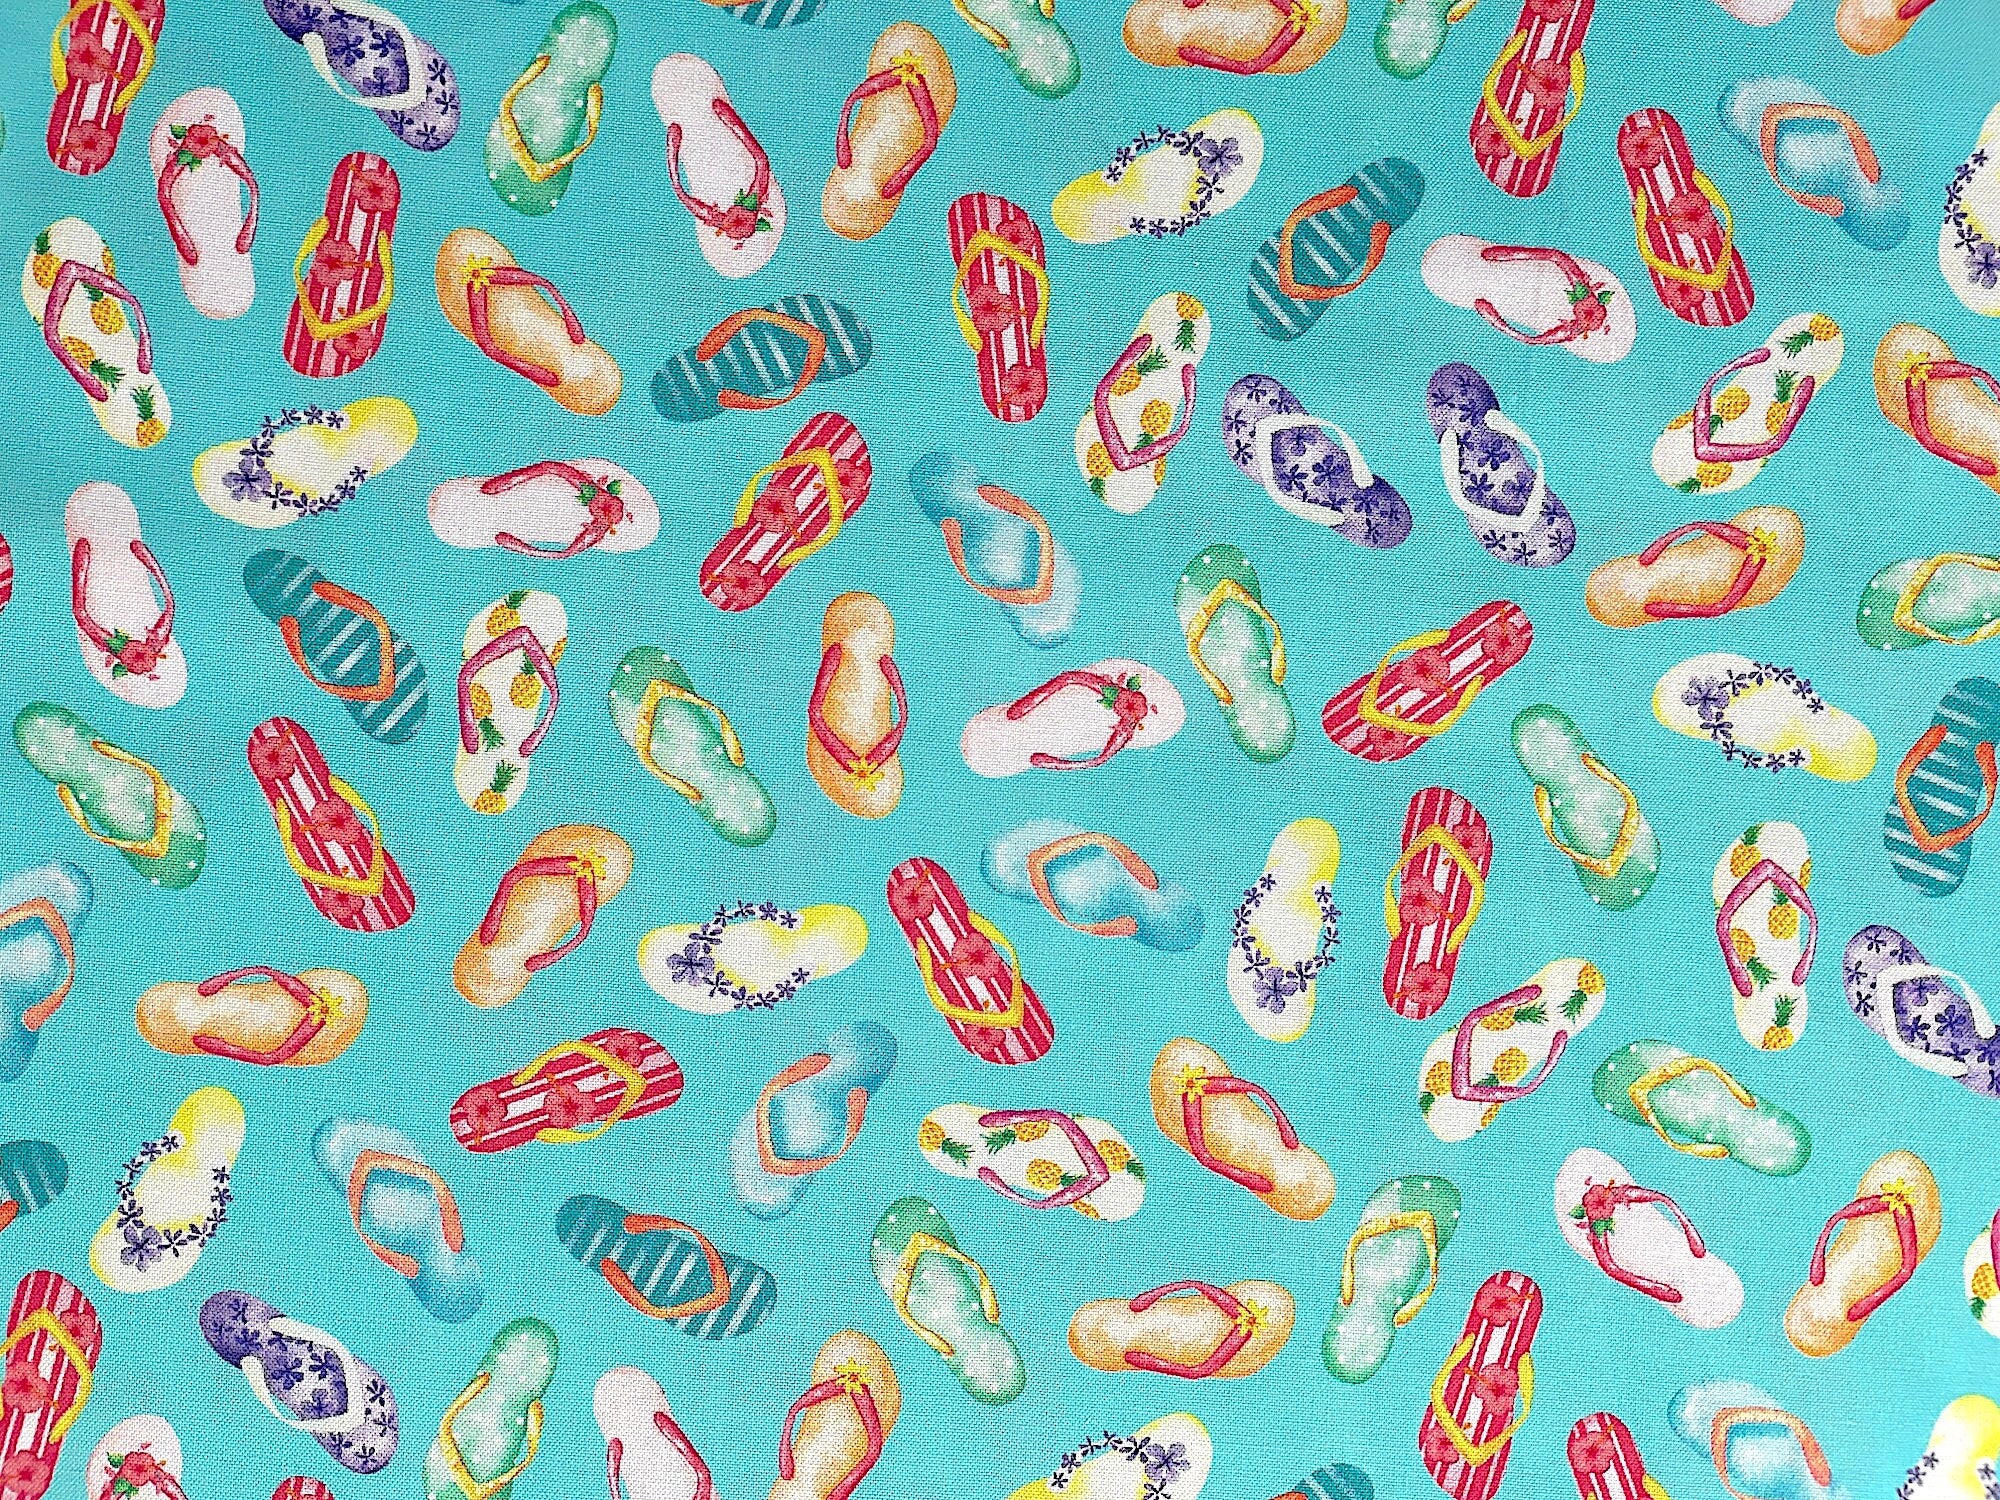 This fabric is part of the Fun In The sun collection. This turquoise fabric is covered with colorful flip flops